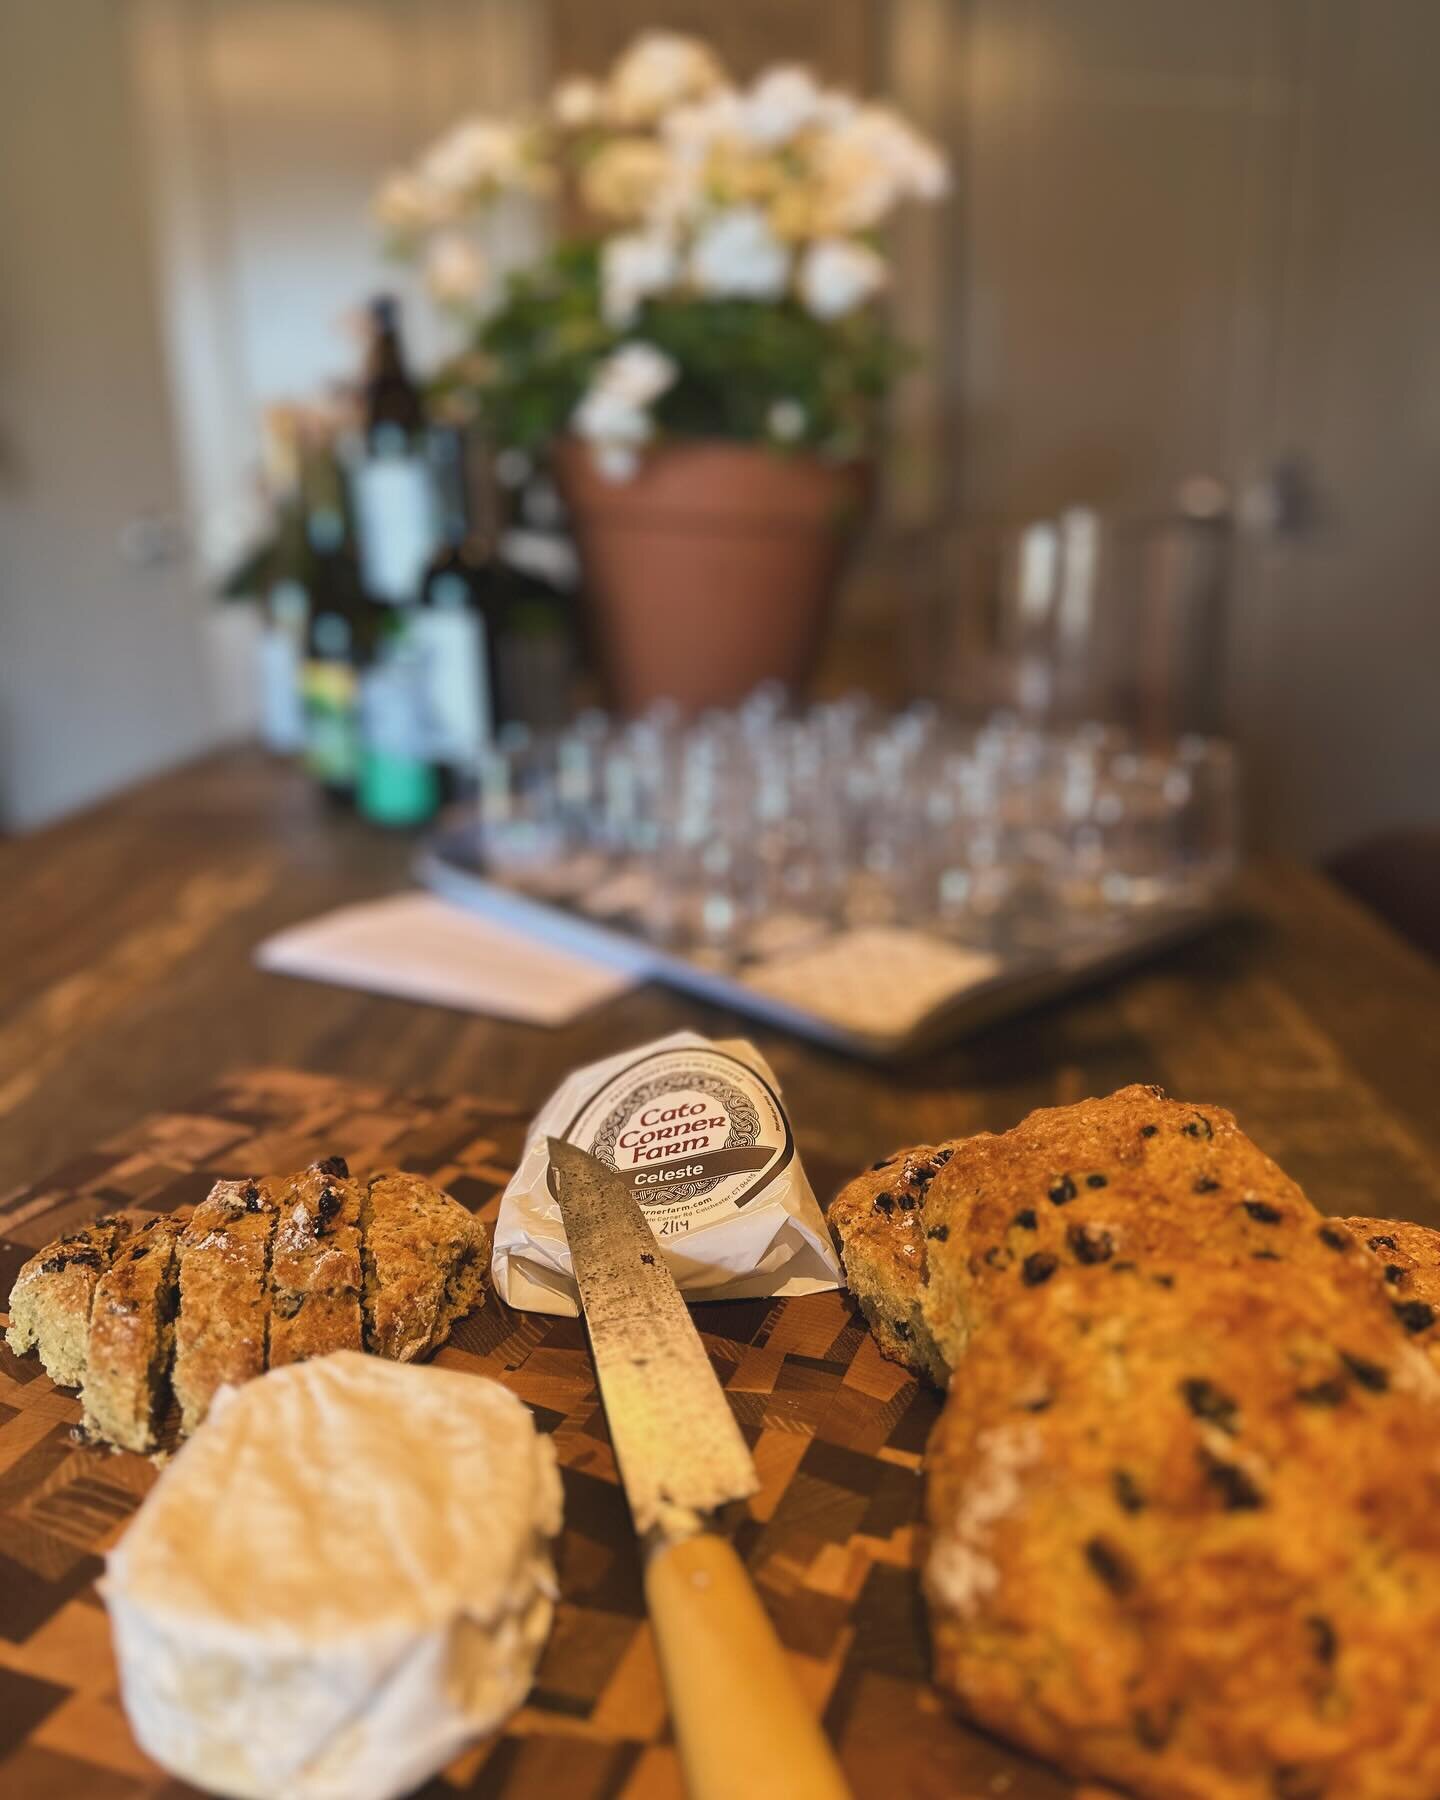 Happy St. Paddy&rsquo;s Everyone! Enjoy that abundant sunshine and the parade! I love a good marching band!!

We are open, should you need us, and I made soda bread, which I have paired with @catocornerfarmcheese Celeste. Incredible together, and a u